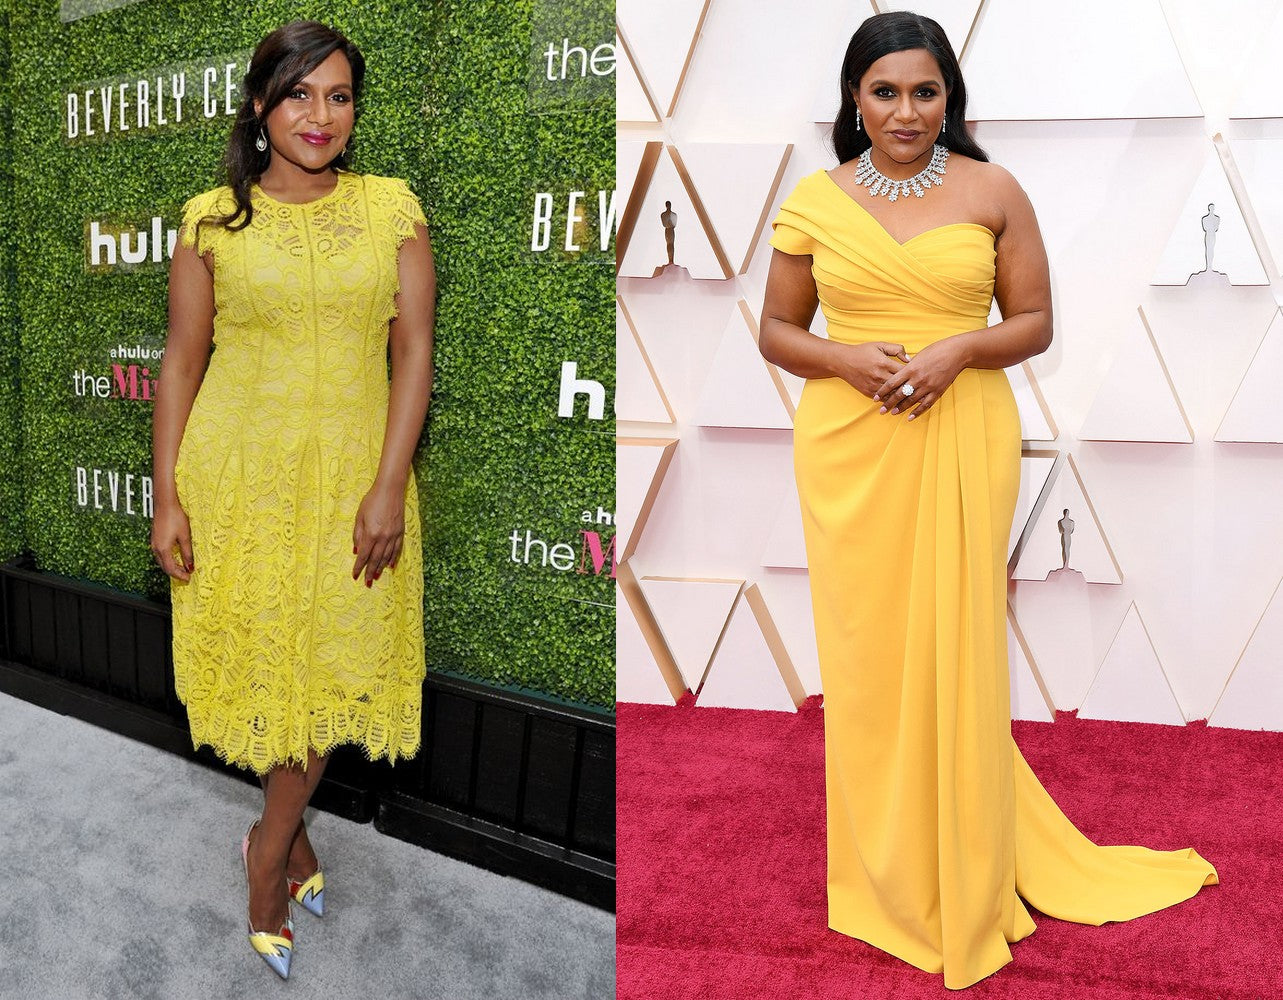 actress mindy kaling pictured at two different events wearing below-knee-length dresses in different shades of yellow.